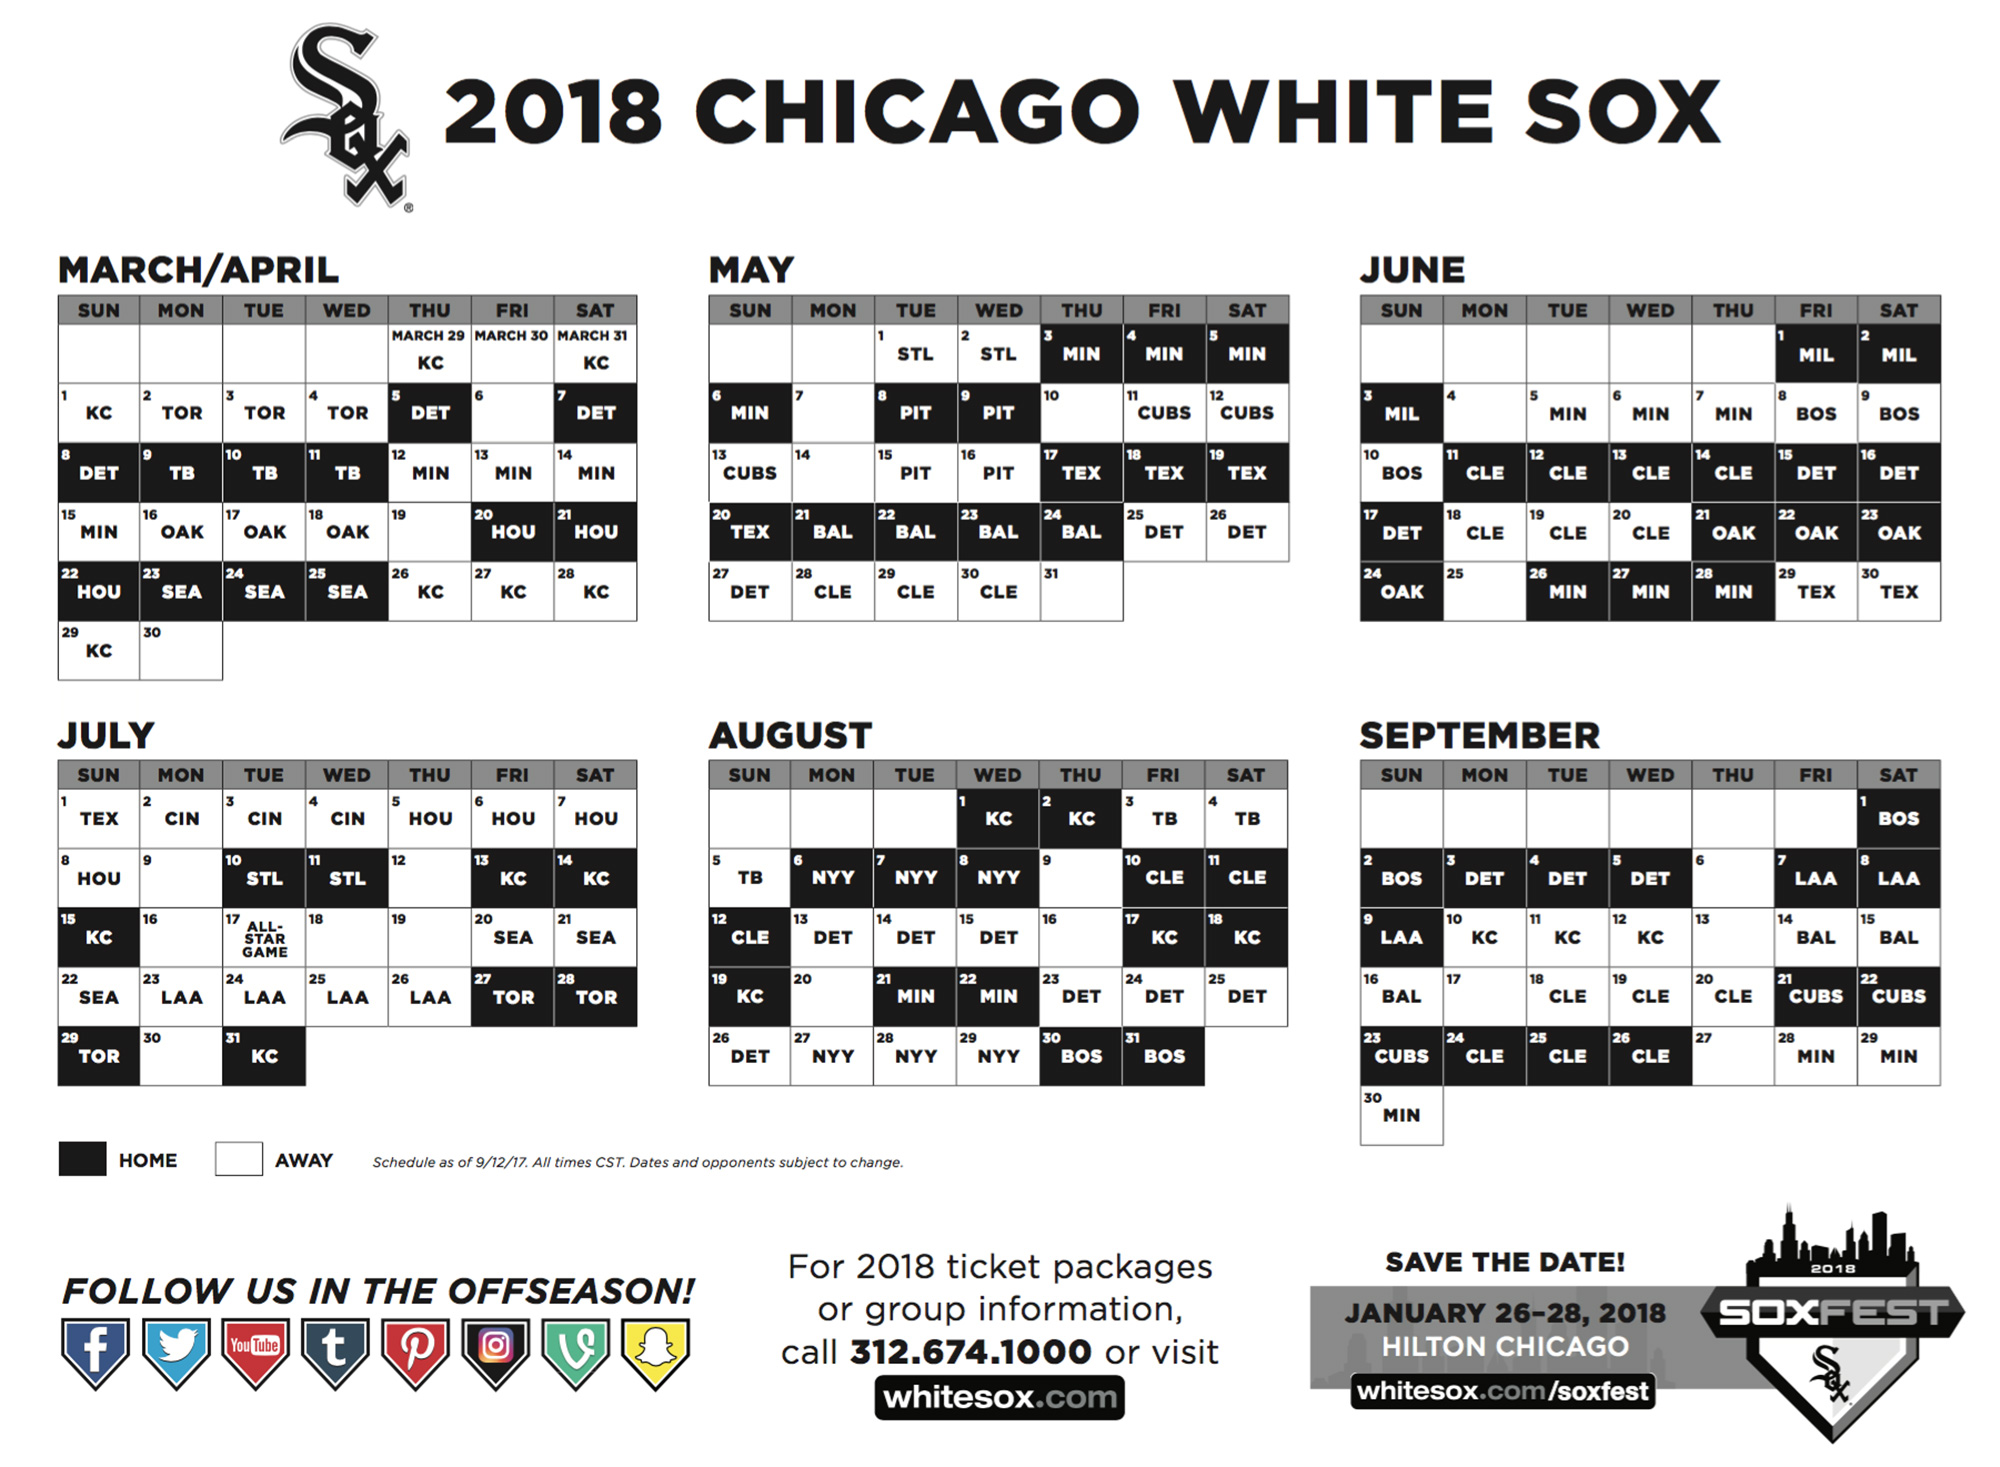 see the 2018 schedules for the cubs and white sox - nbc chicago